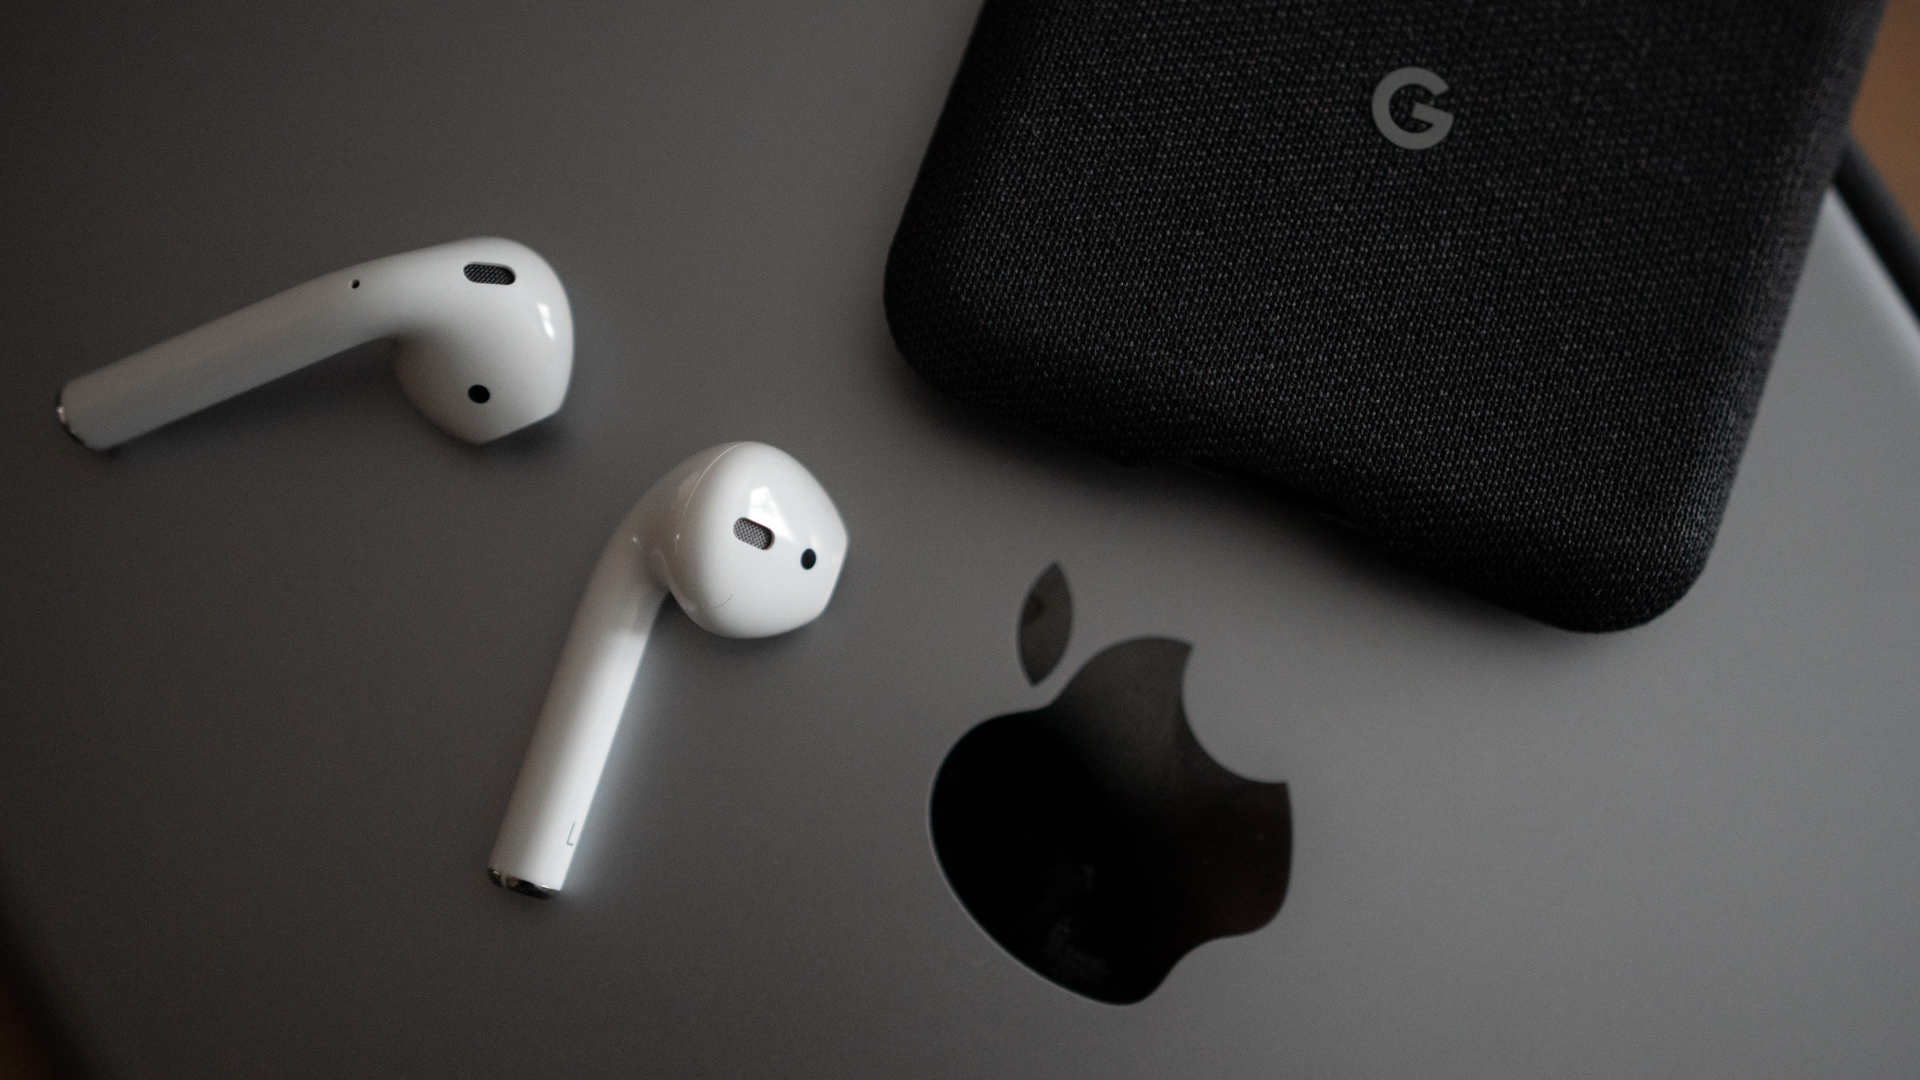 Airpods пауза. Apple AIRPODS 2. Наушники Apple AIRPODS Pro 2nd Generation. Iphone AIRPODS 2. Apple AIRPODS 3rd Generation.